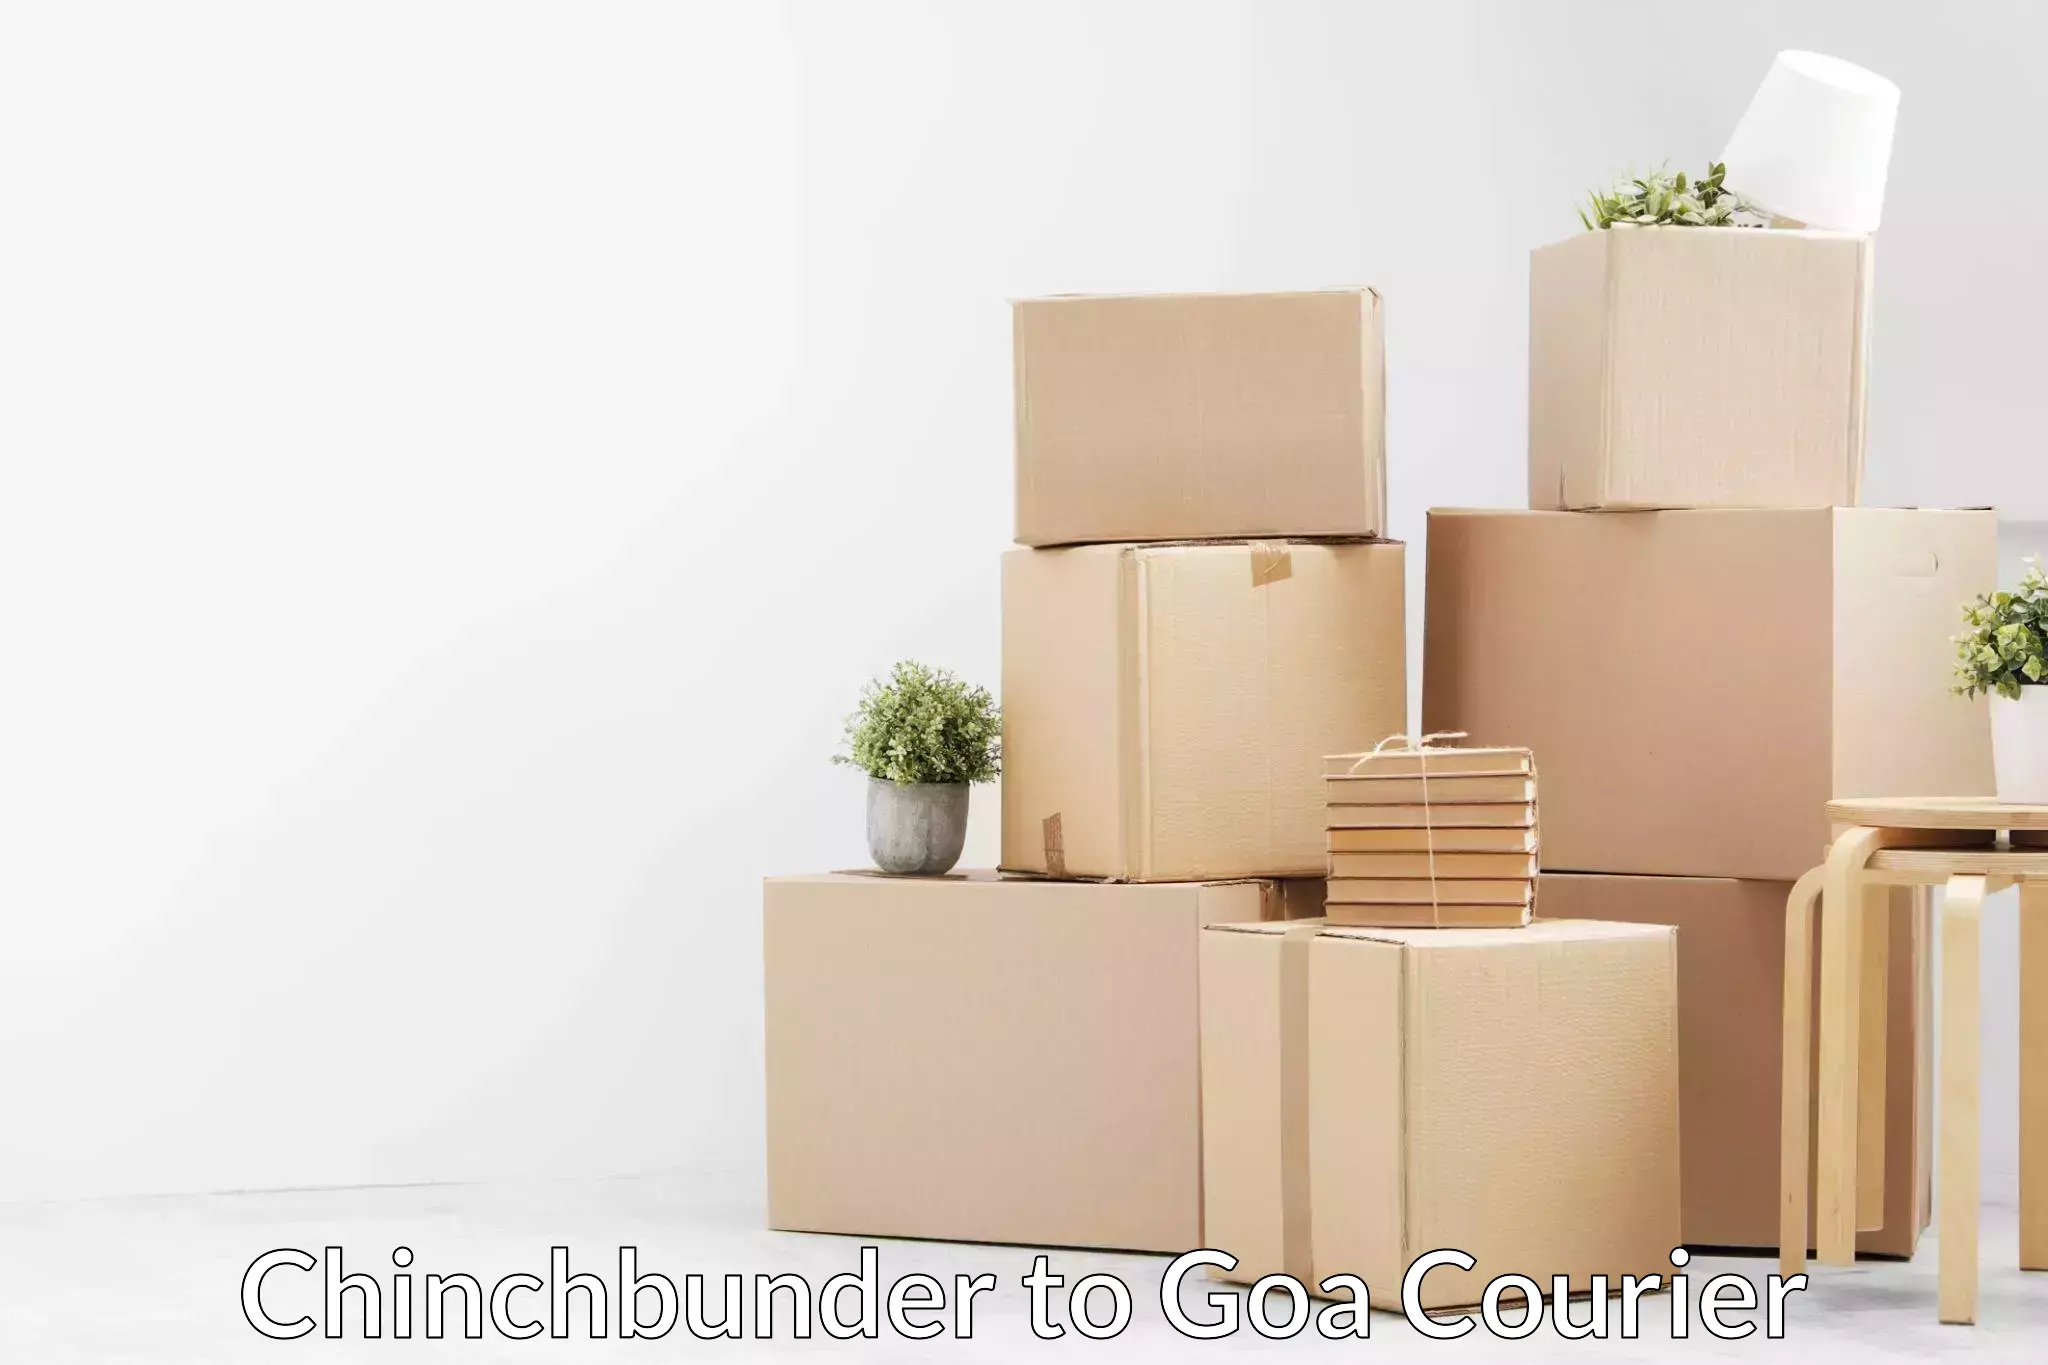 Hassle-free relocation Chinchbunder to Margao